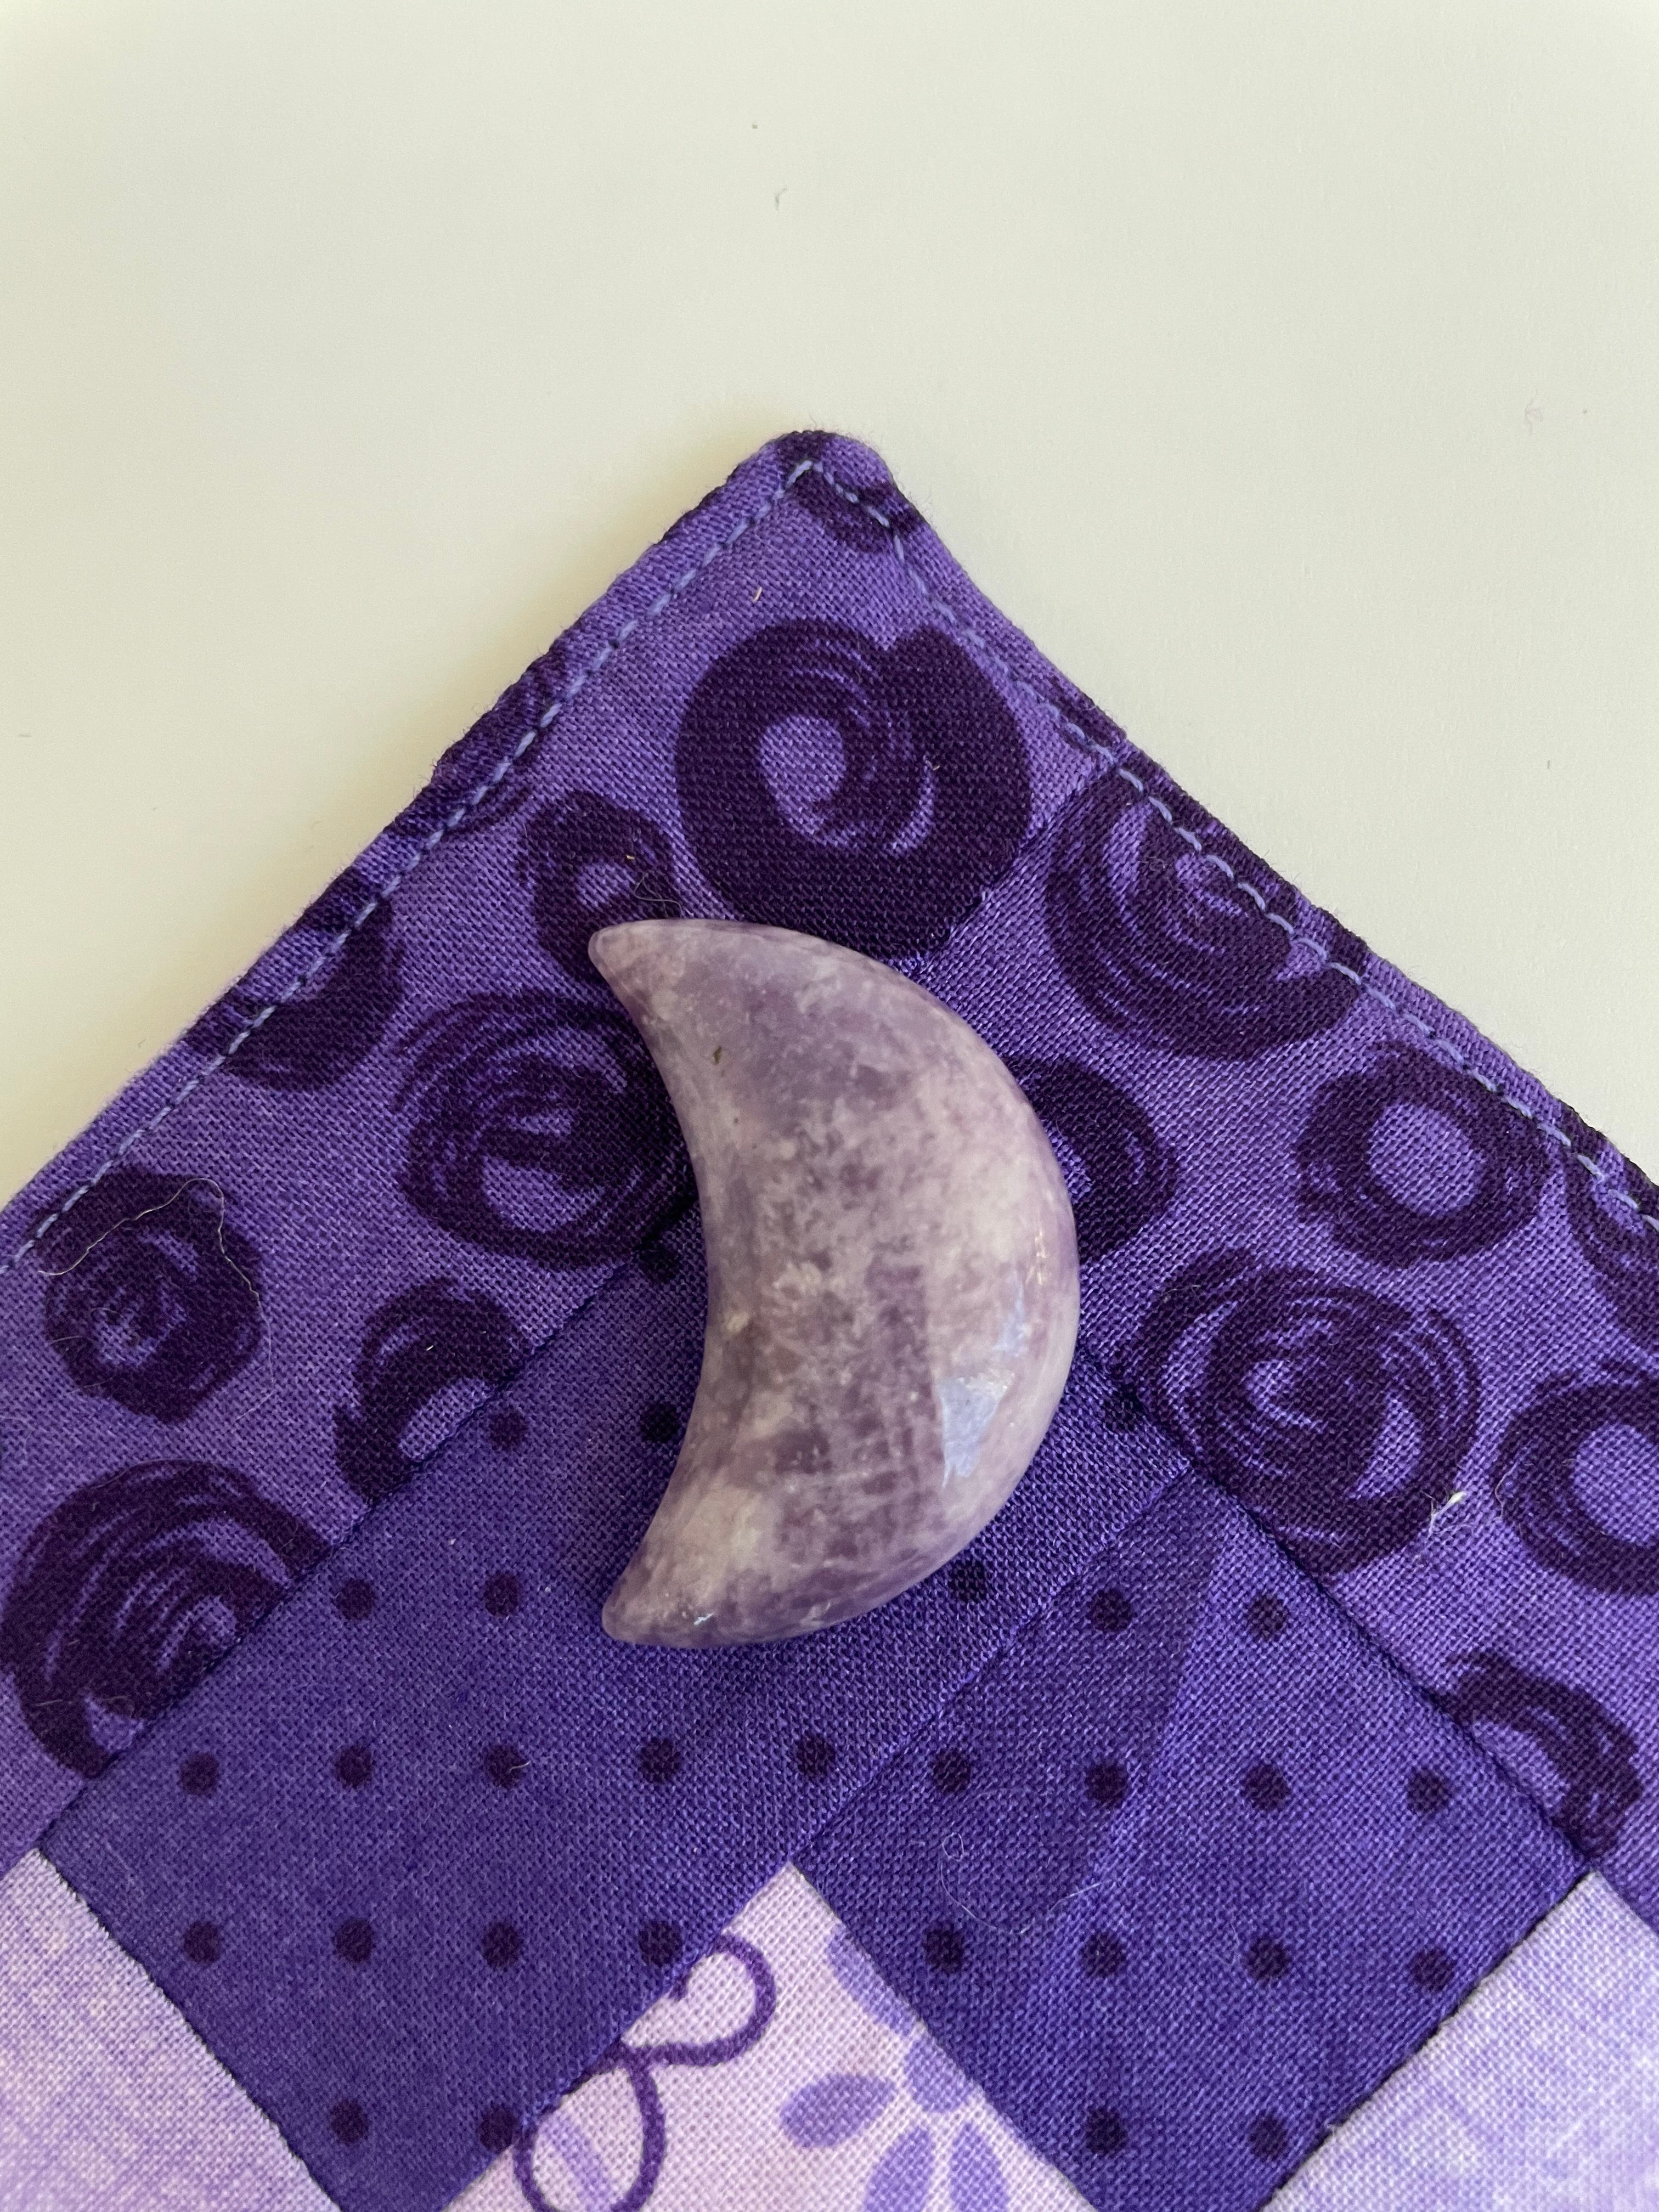 Reverse side of lepidolite crescent moon. ﻿This sparkly little lavender-colored lepidolite crescent moon can be used for meditation, healing, for your altar, on/near your computer or as décor for any room in your home or office. Easy to slip right into your pocket so you can take the energy of lepidolite everywhere you go. Approx. 1¼". Cost is $6.